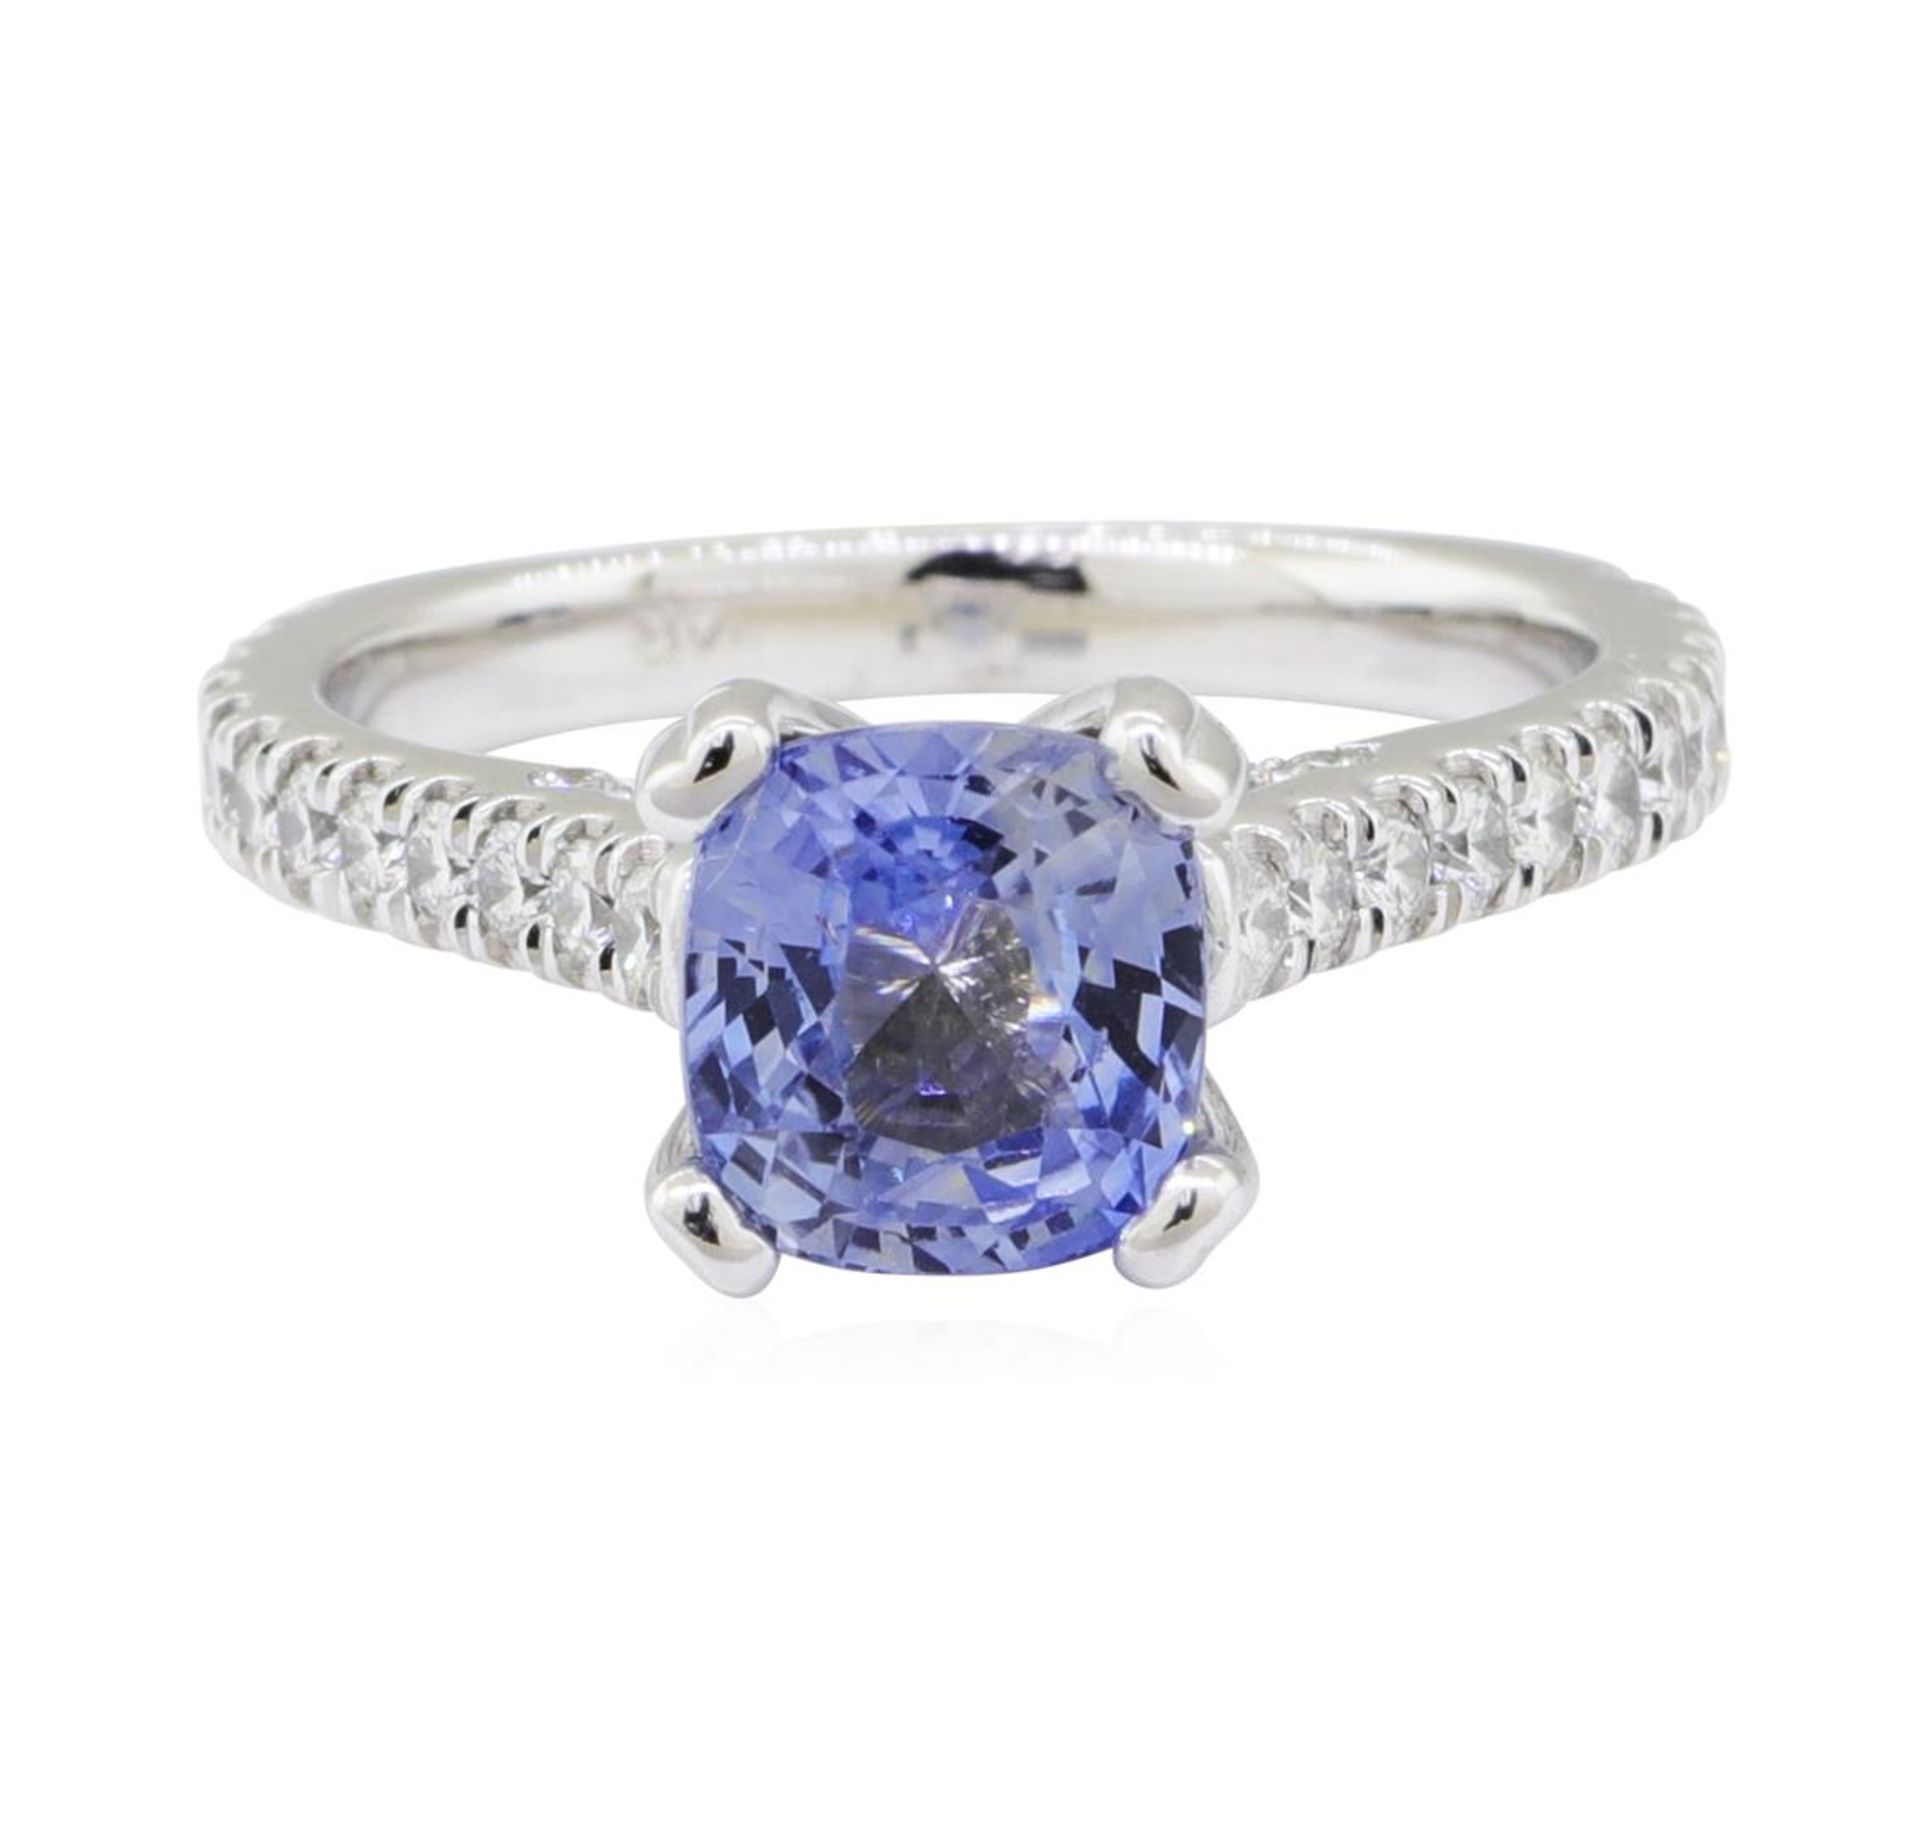 3.06 ctw Sapphire and Diamond Ring - 14KT White Gold - Image 2 of 5